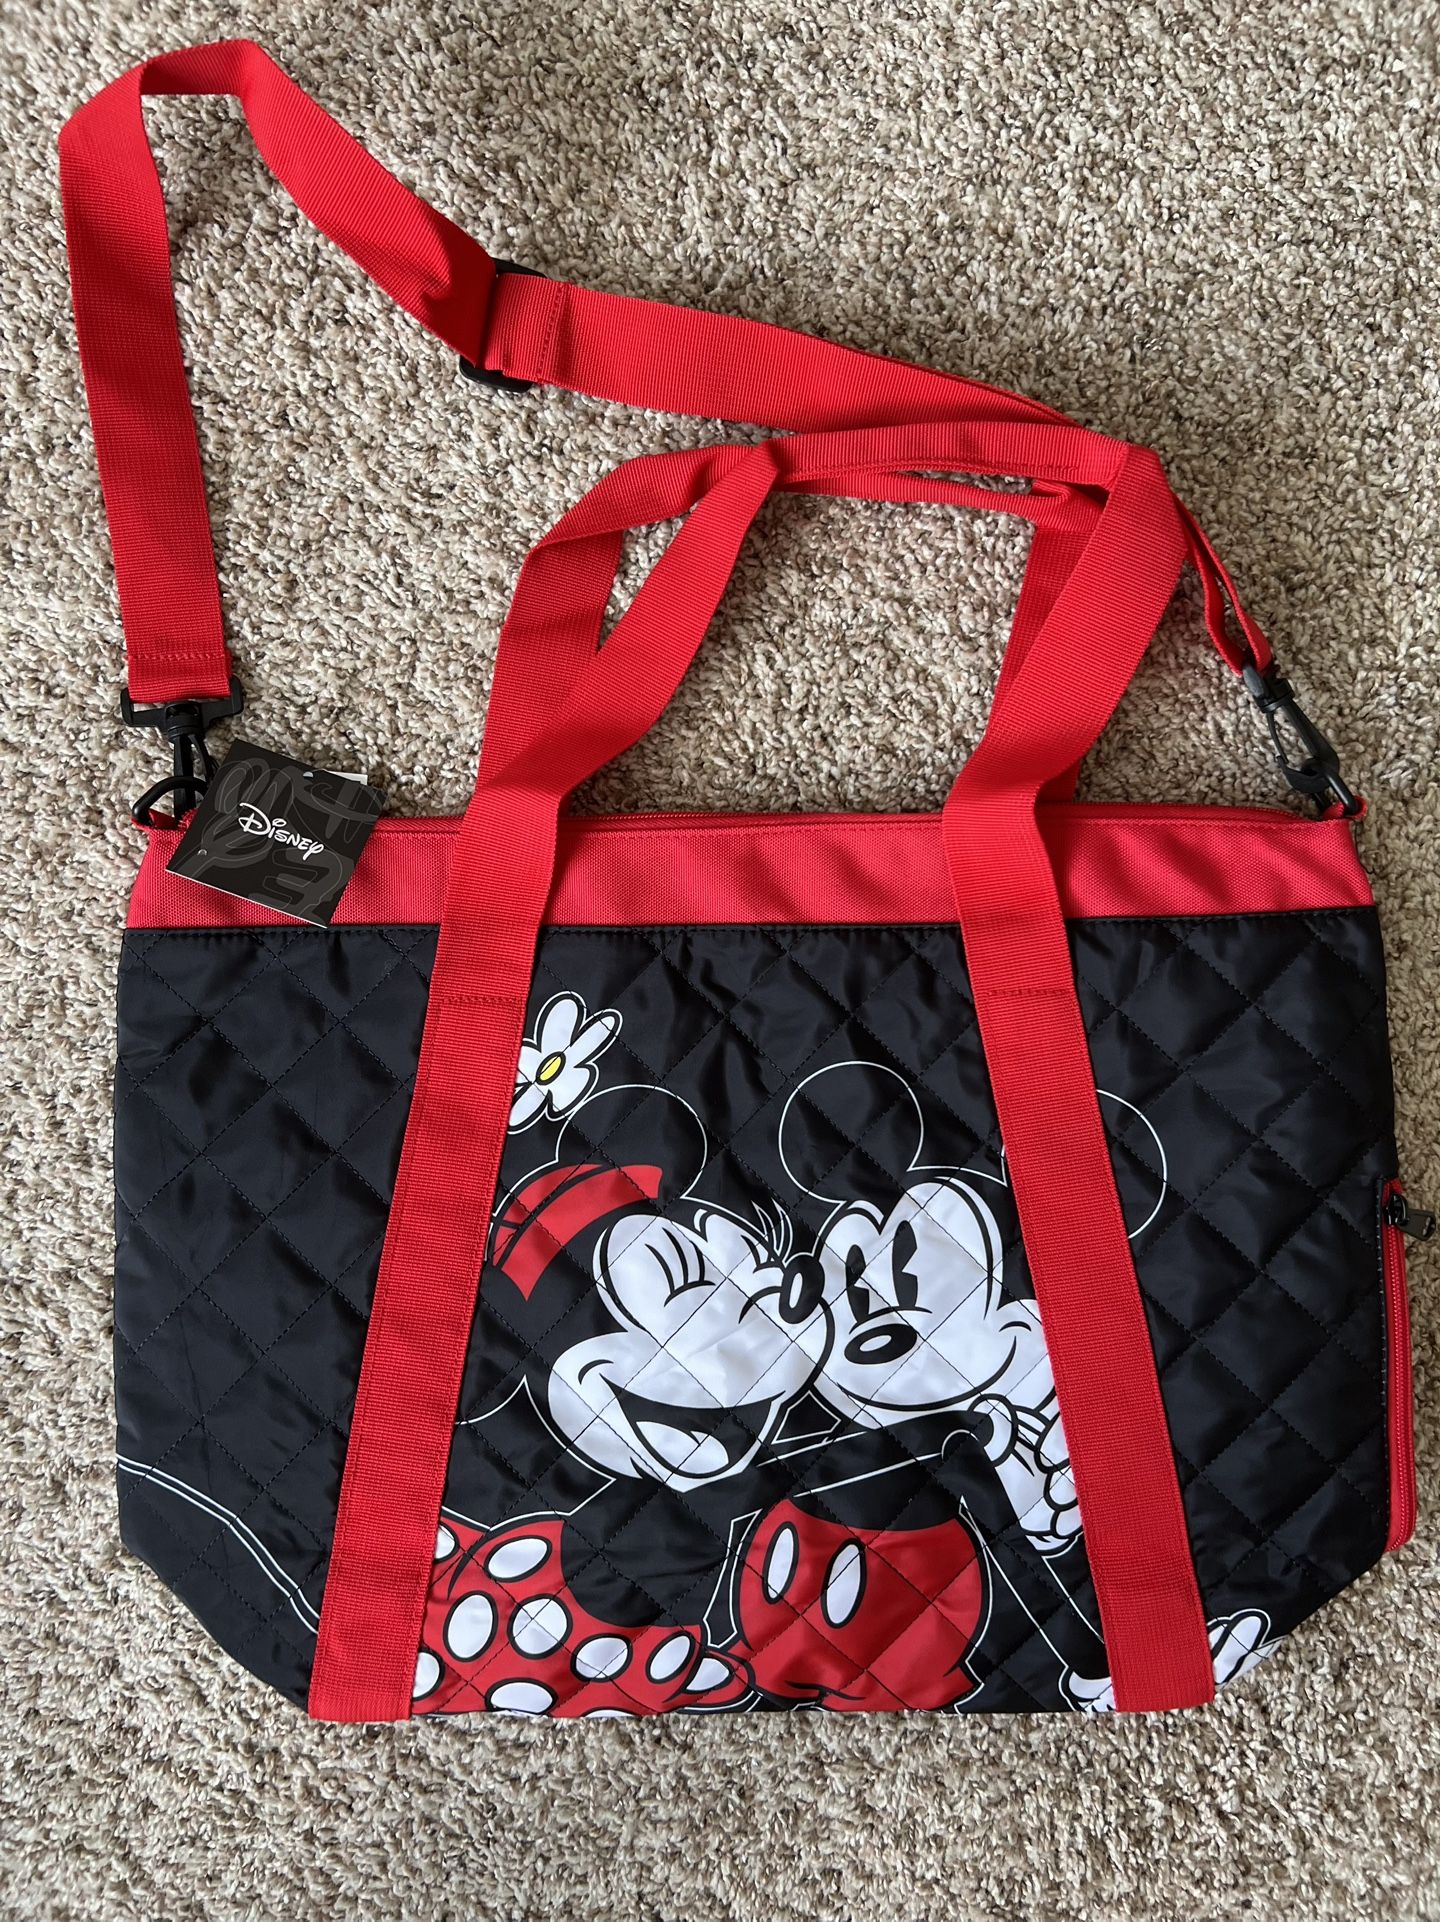 Disney Mickey and Minnie Mouse Bioworld Tote Travel Bag Red Black